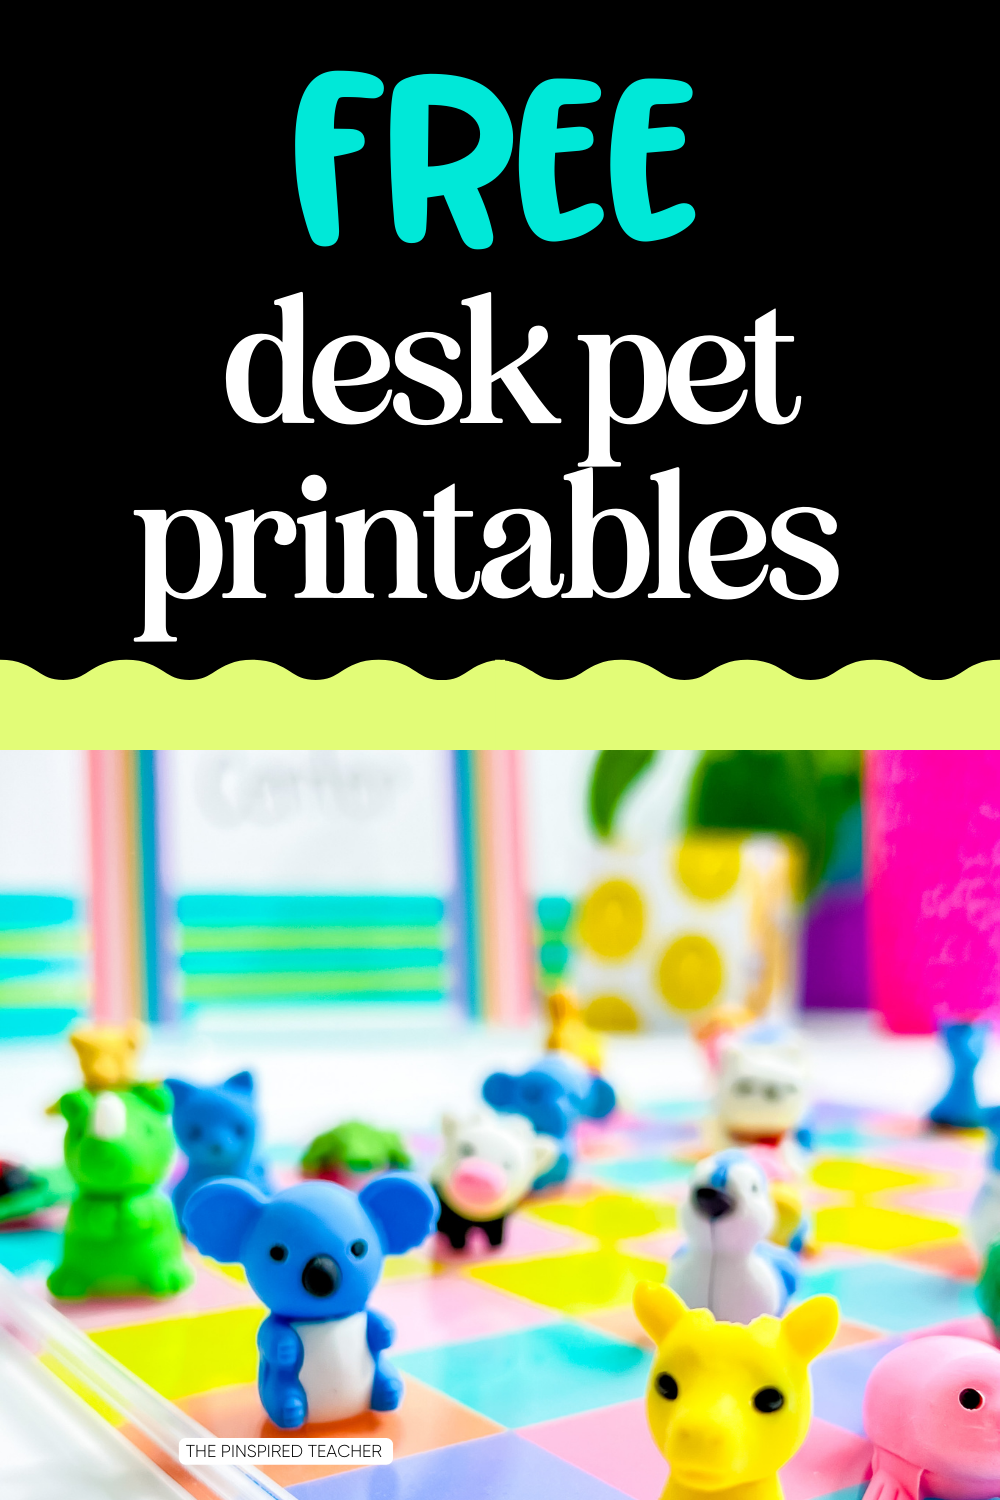 Desk Pets in the Classroom Free Printables and Ideas The Pinspired